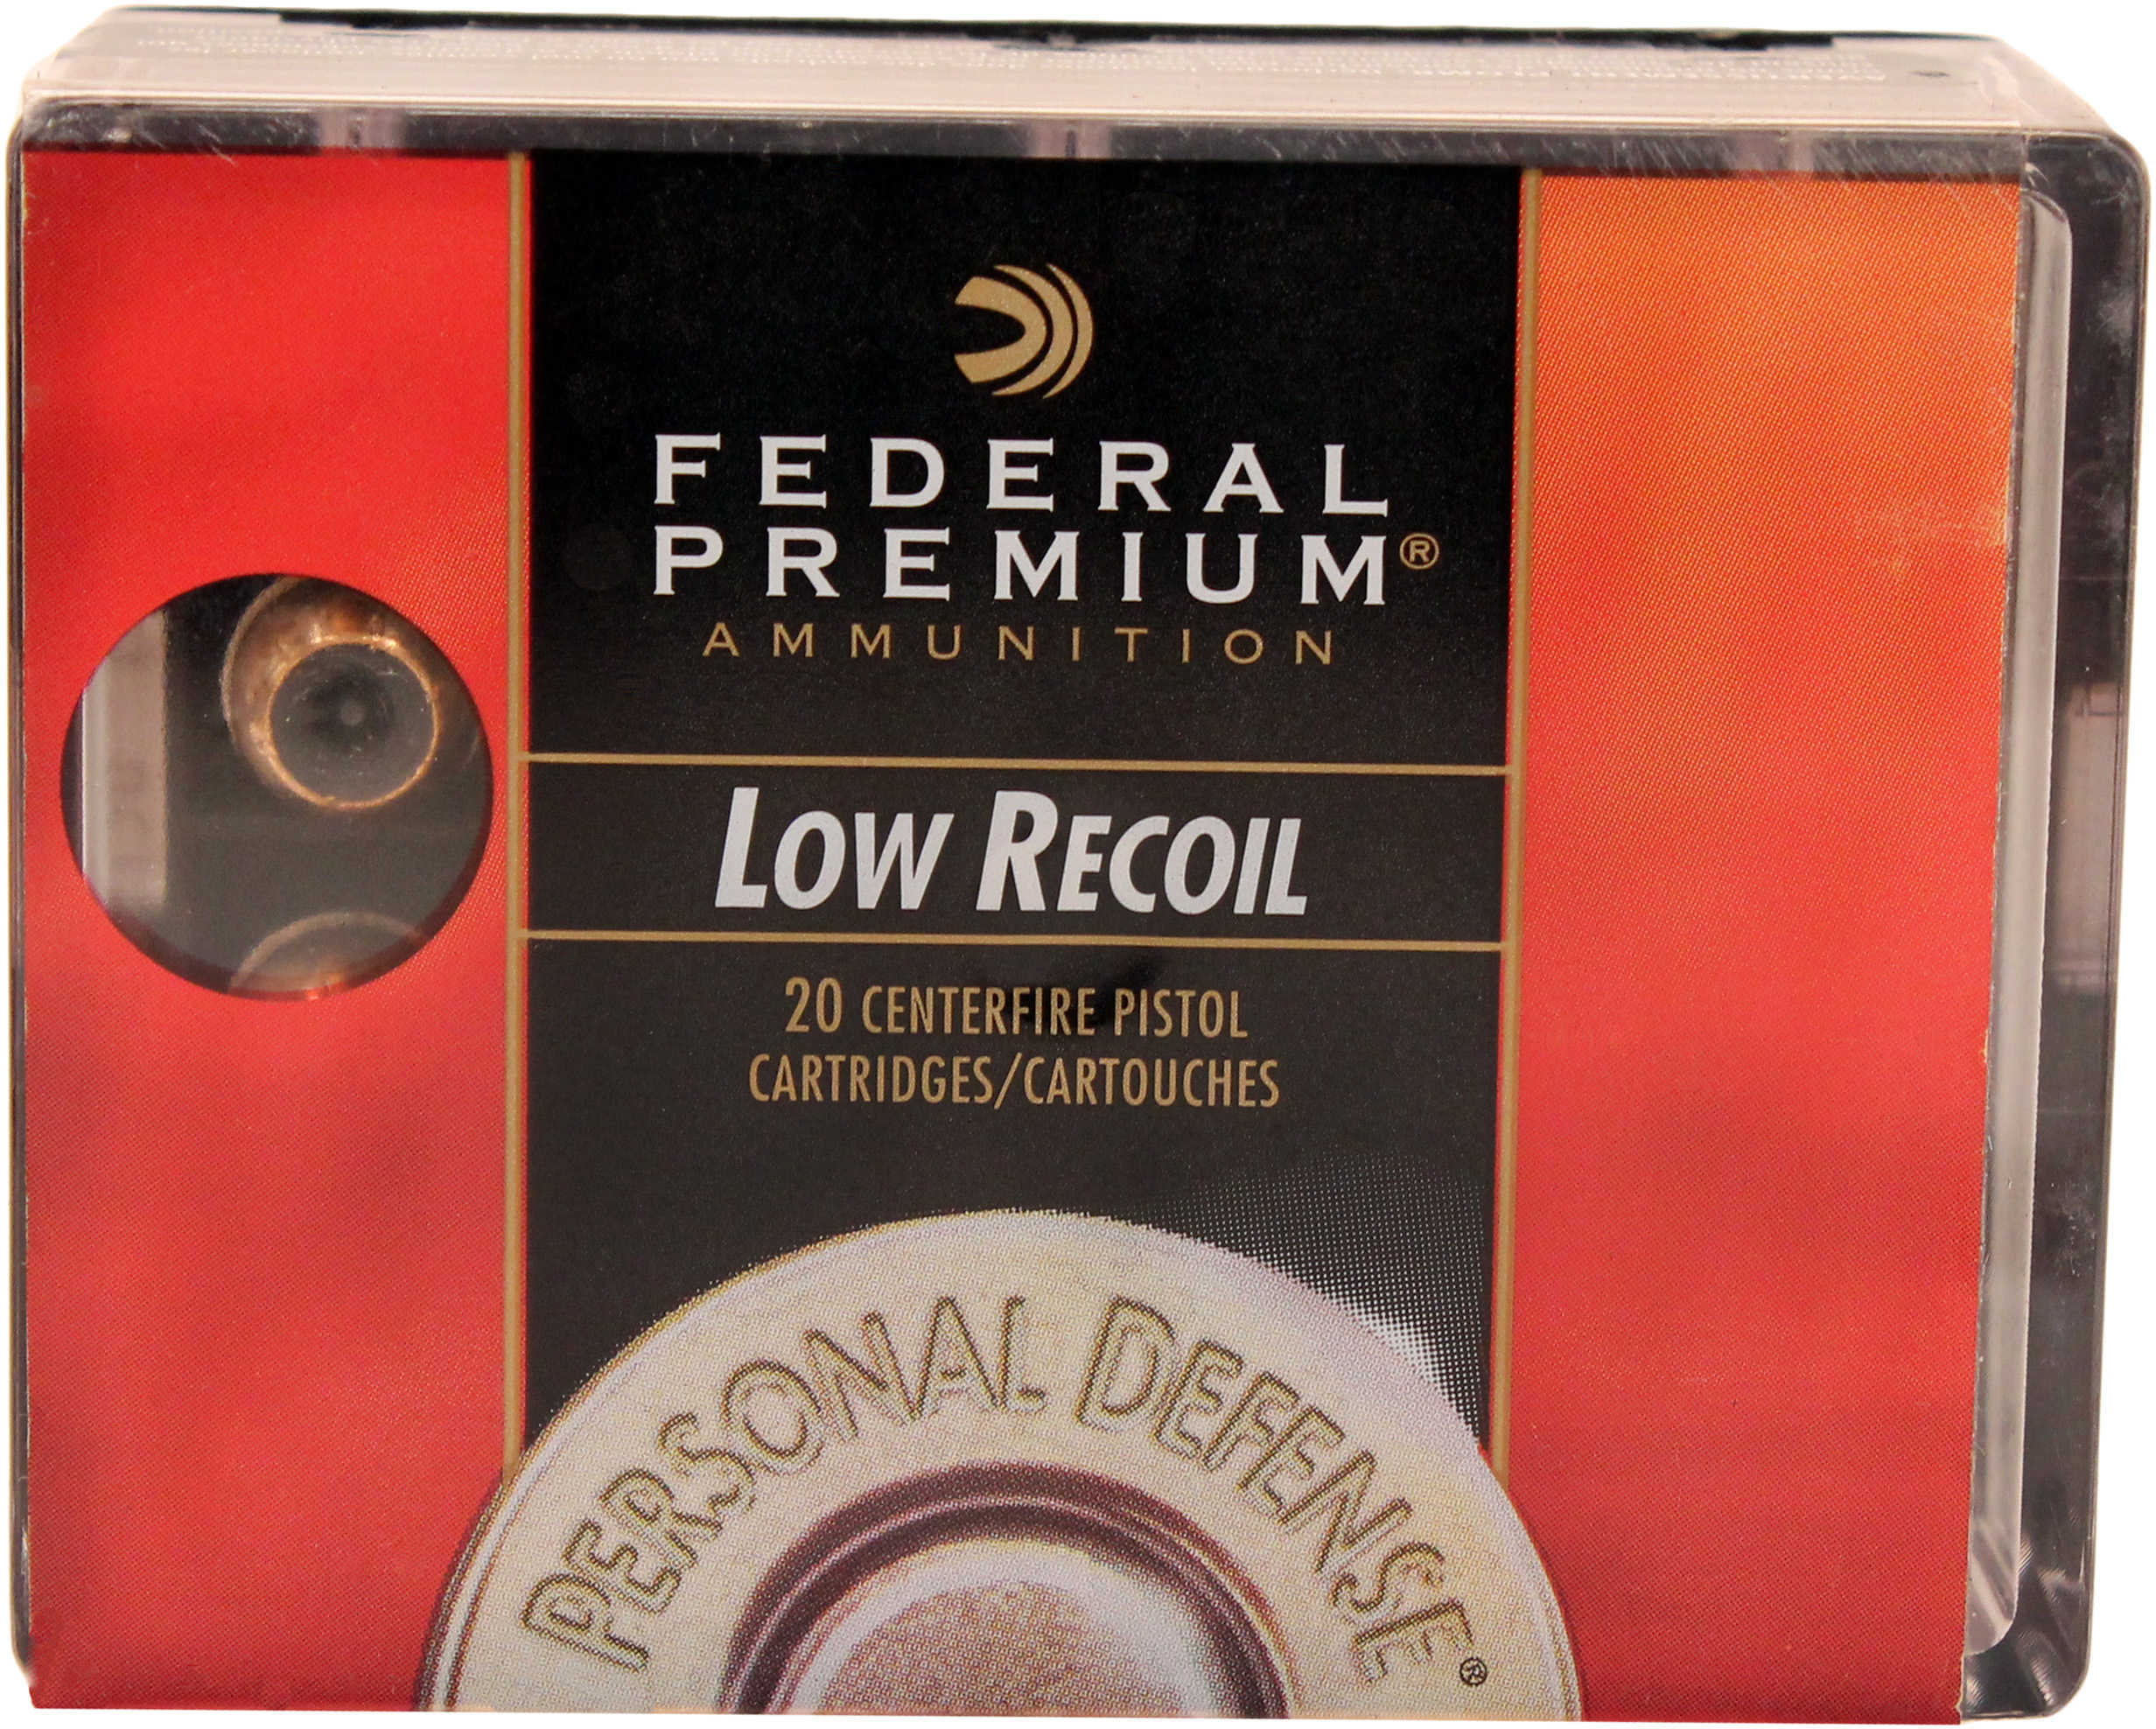 Federal 40 Smith & Wesson 40 S&W 135 Grain Hydra-Shok Jacketed Hollow Point Ammunition Md: Pd40Hs4H